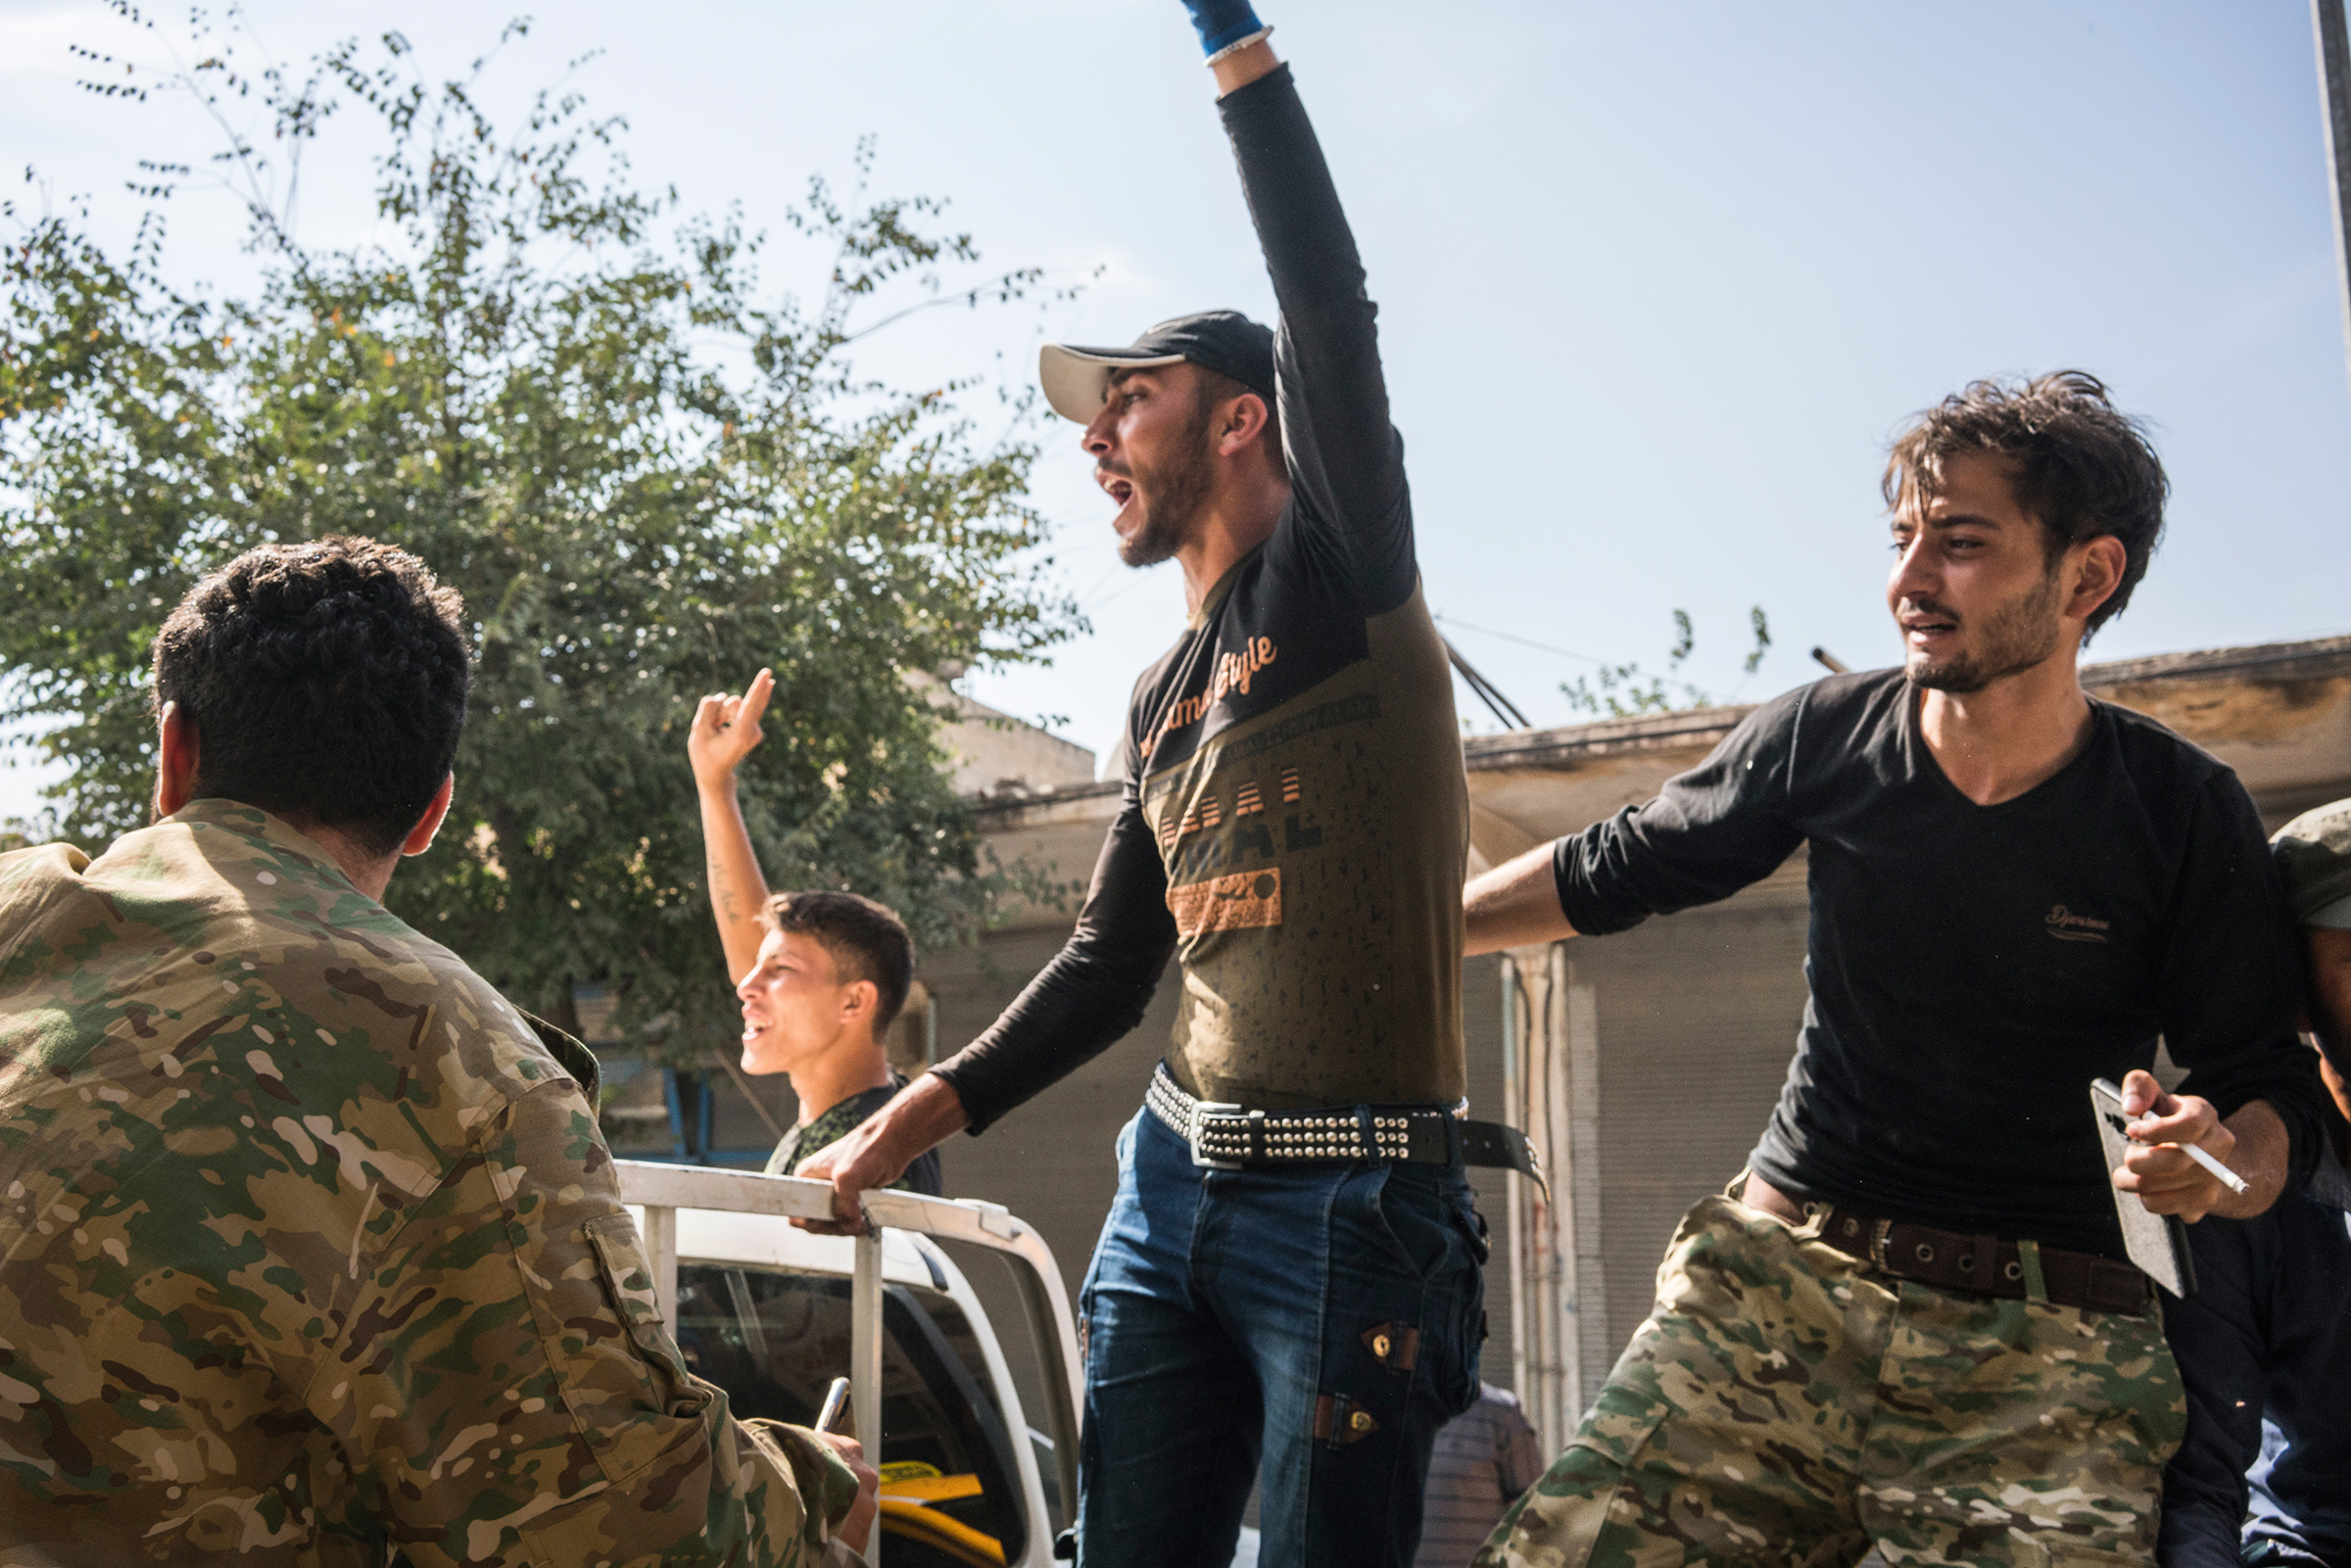 Turkish-backed Syrian rebels shout on the back of a pickup truck on a street in the Turkish border town of Akçakale on Oct. 14, 2019.